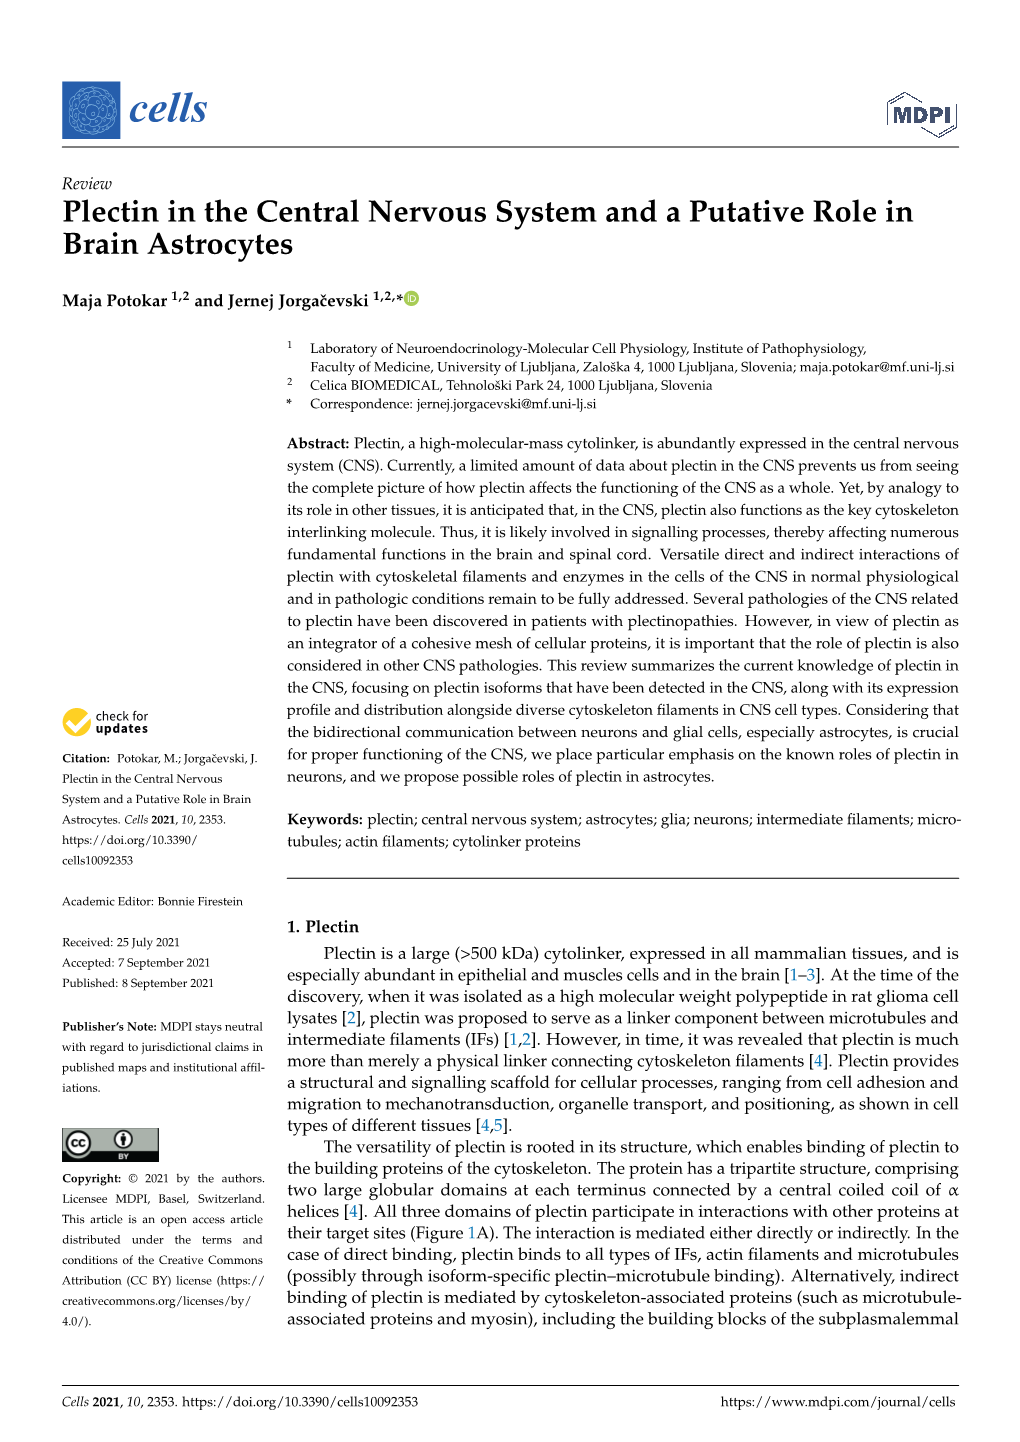 Plectin in the Central Nervous System and a Putative Role in Brain Astrocytes